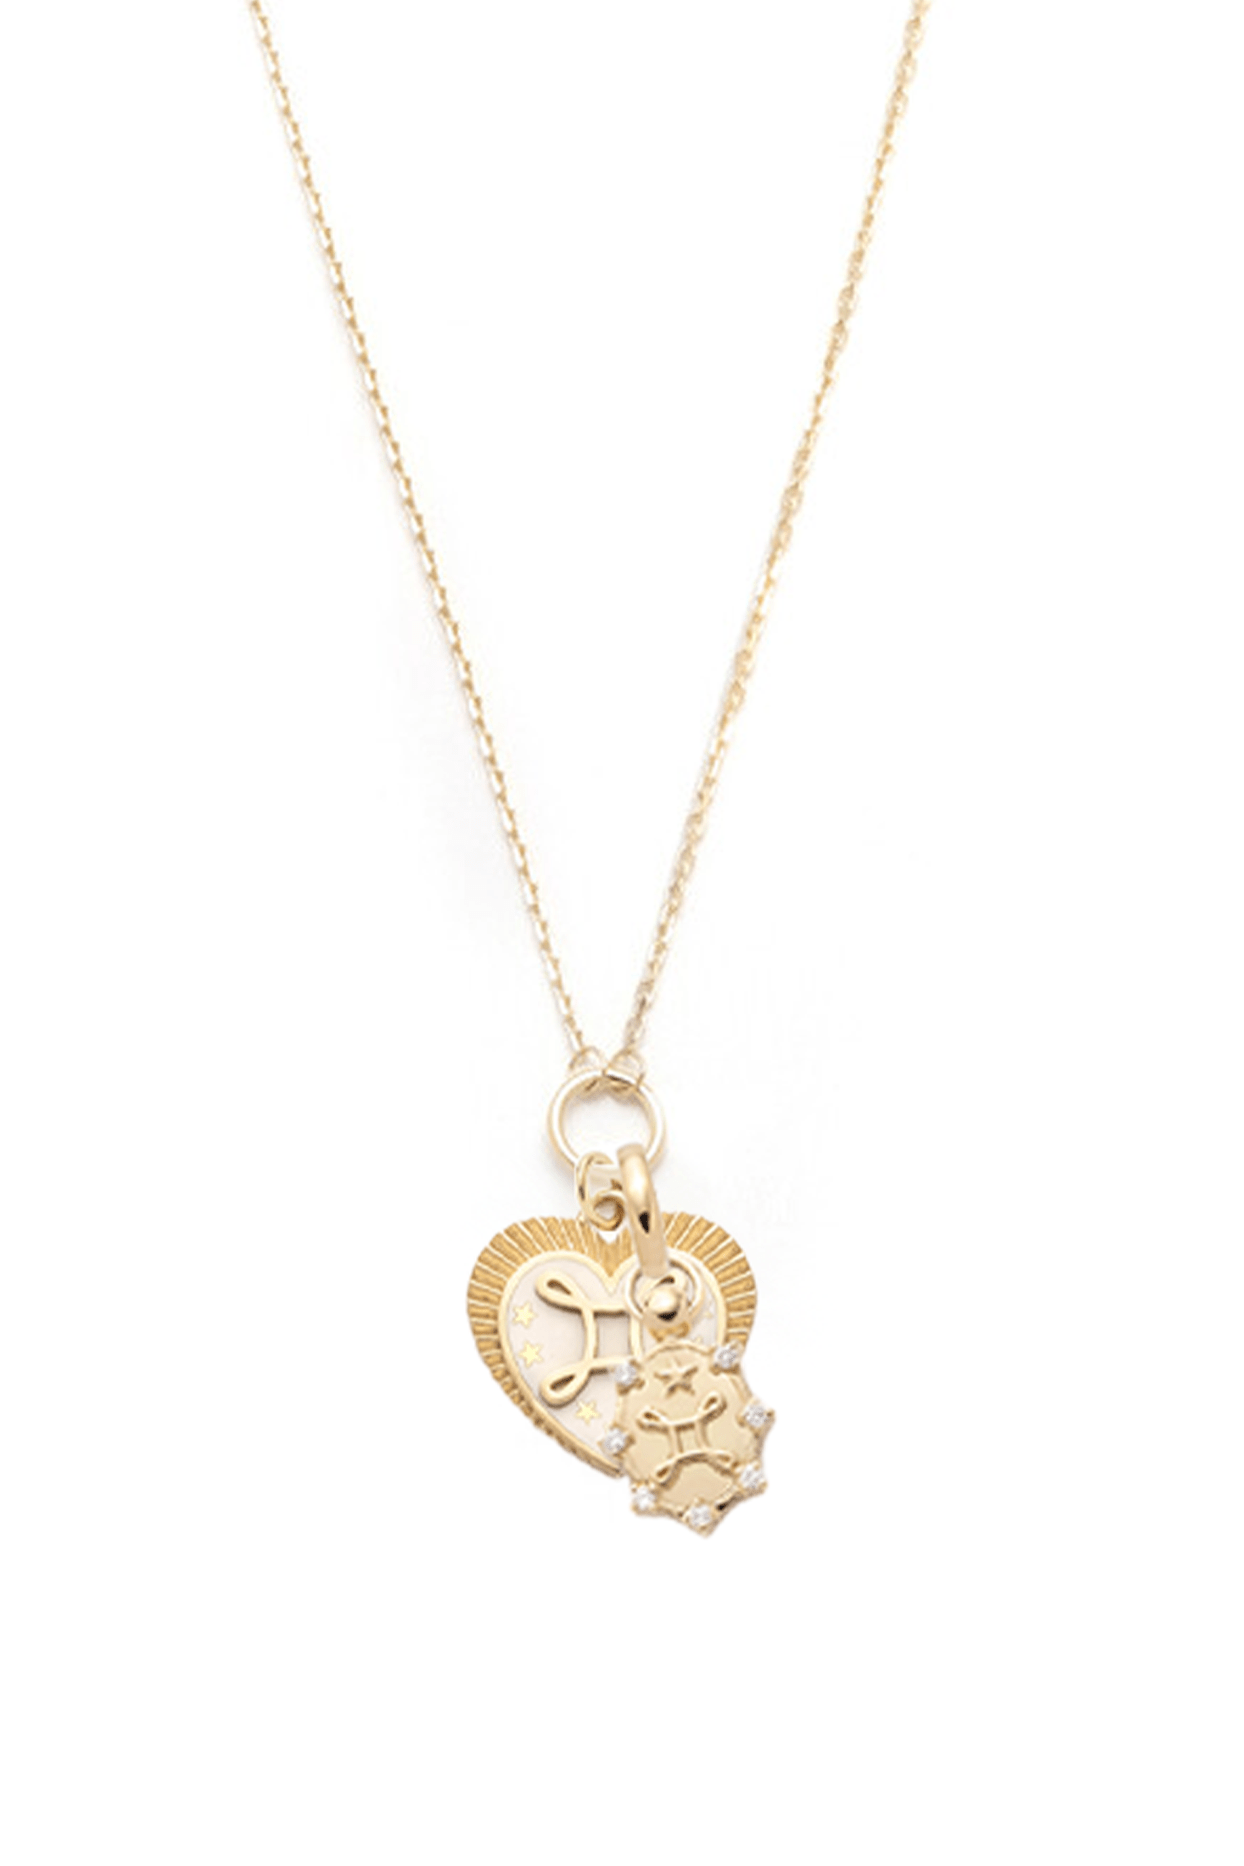 FOUNDRAE-Mini Love Story Necklace-YELLOW GOLD